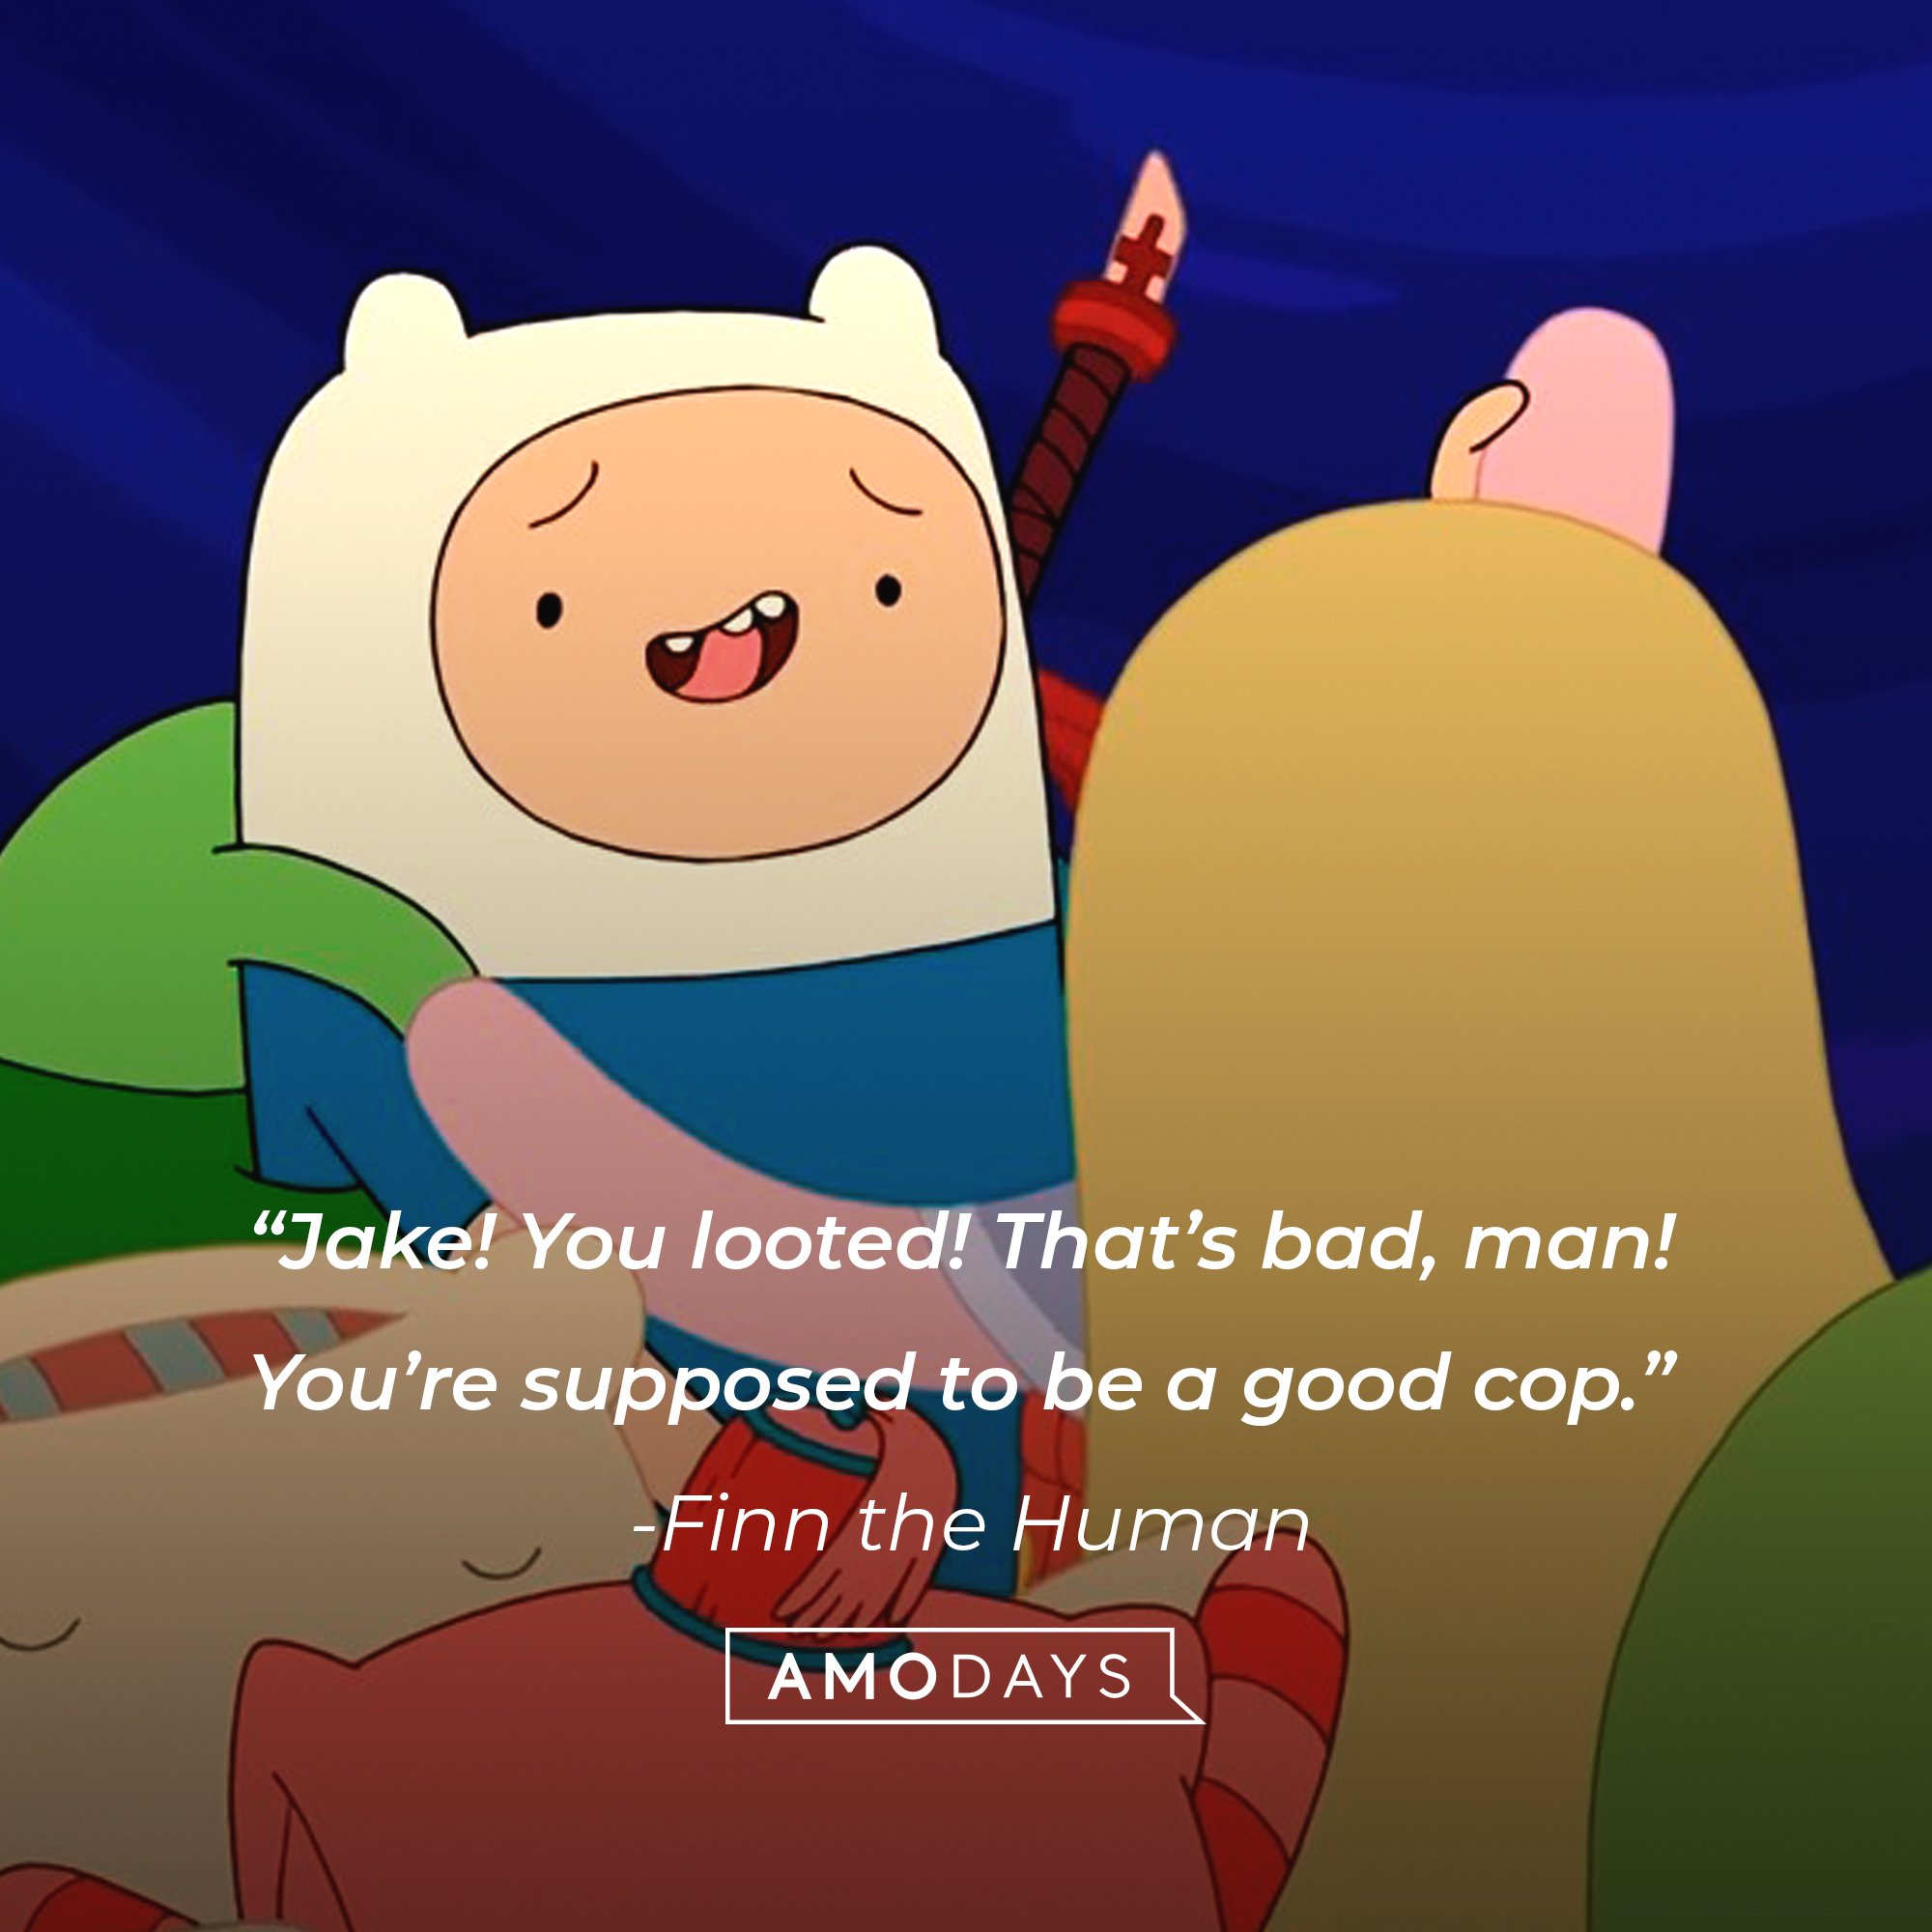   Finn the Human’s quote: “Jake! You looted! That’s bad, man! You’re supposed to be a good cop.”| Image: AmoDays